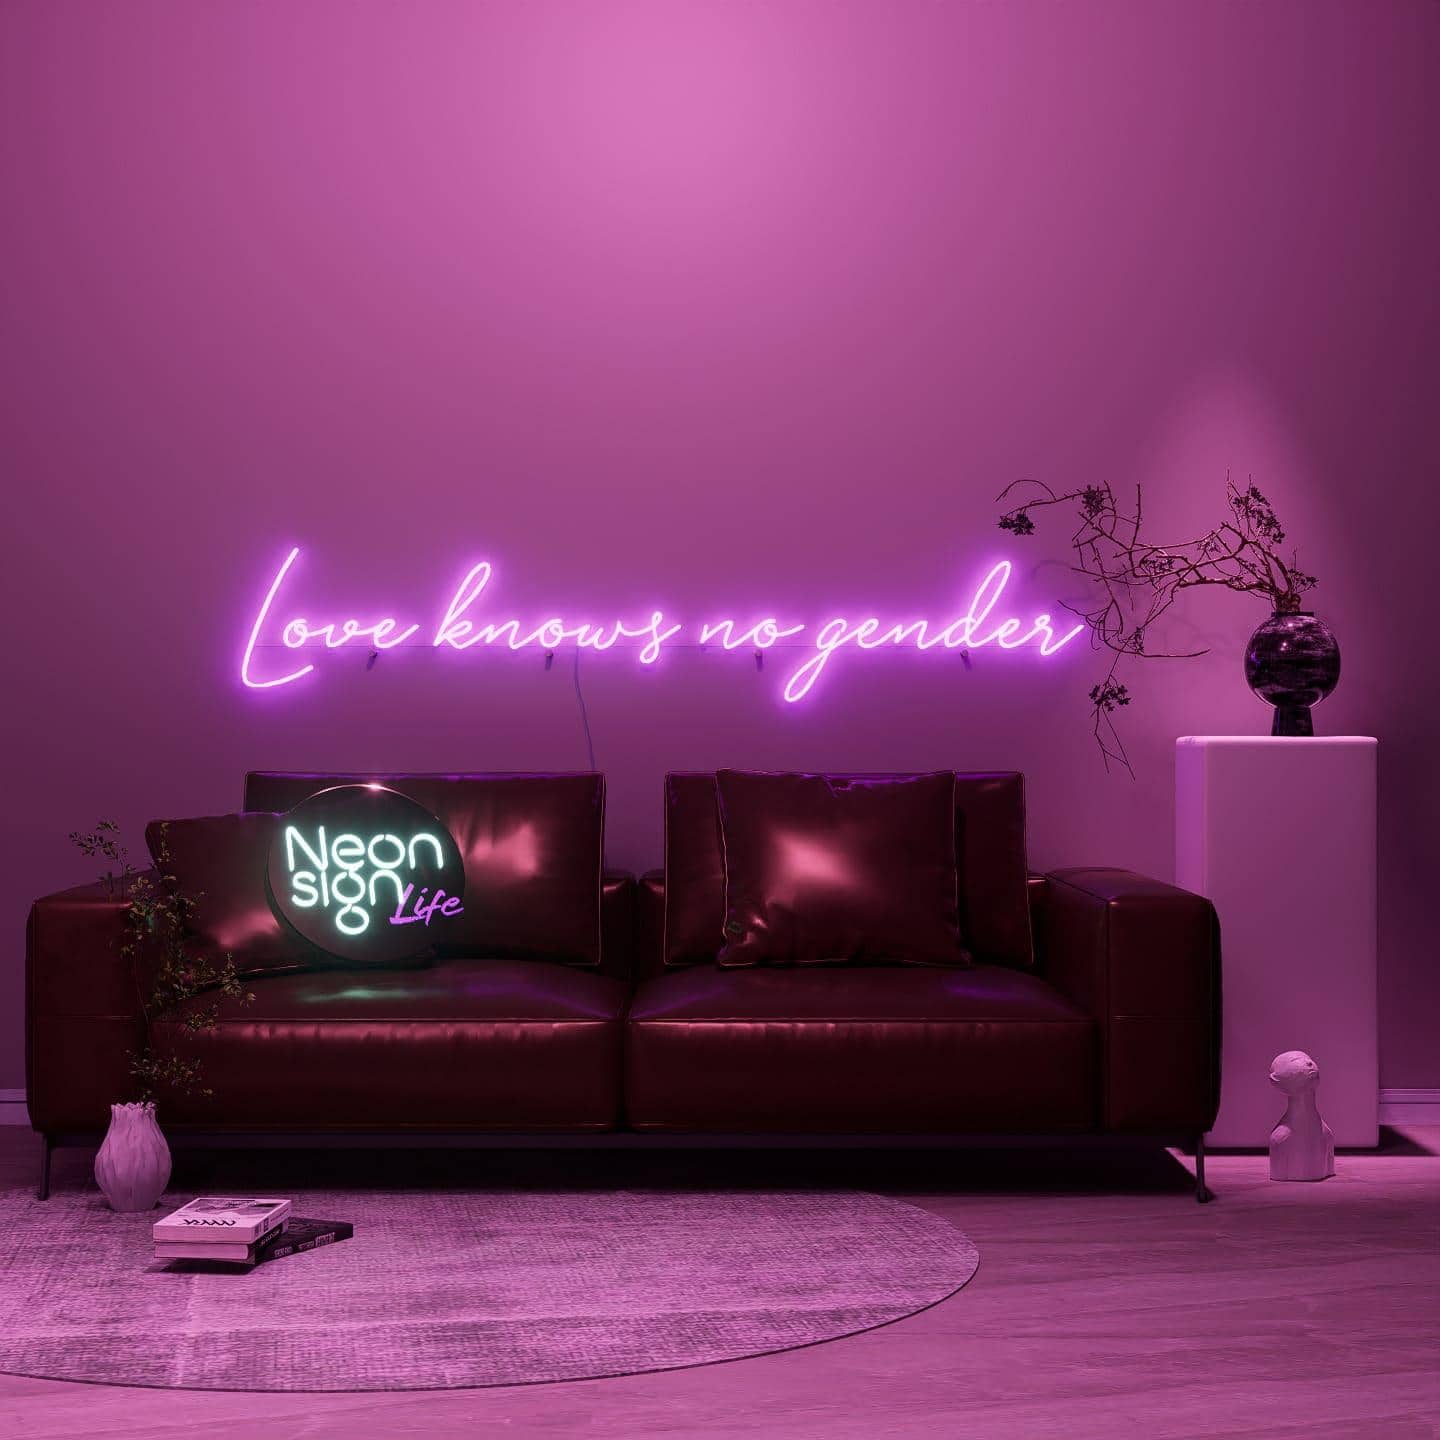 dark-night-shot-with-pink-neon-lights-hanging-on-the-wall-for-display-love-knows-no-gender